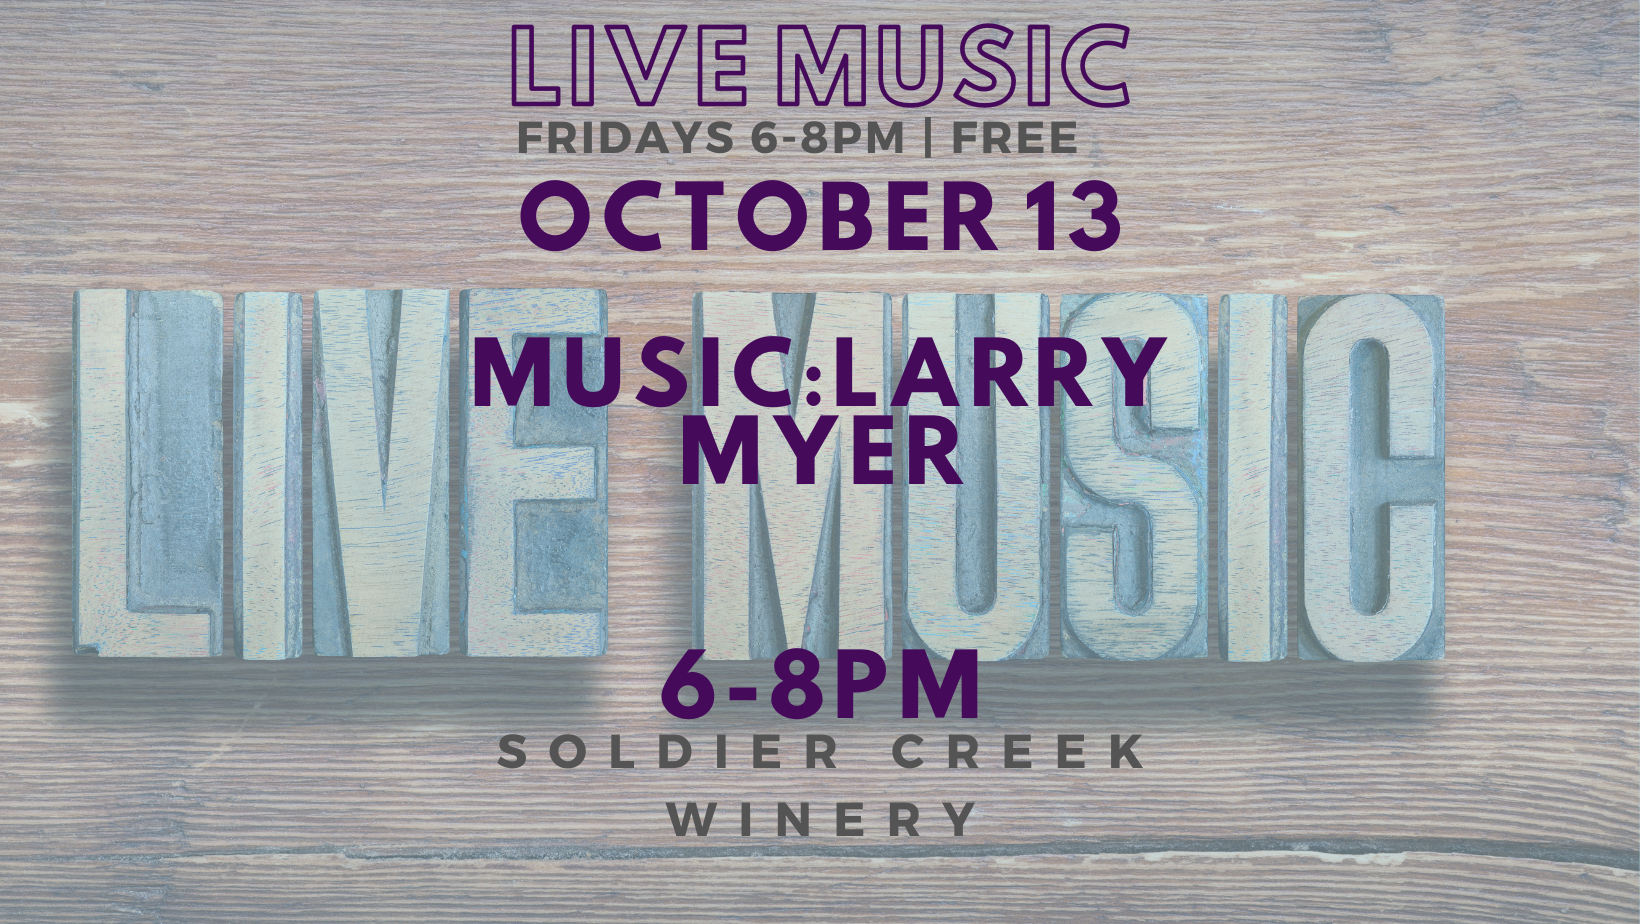 live music at soldier creek winery every friday, october 13 is larry myer from 6-8pm. free to listen!